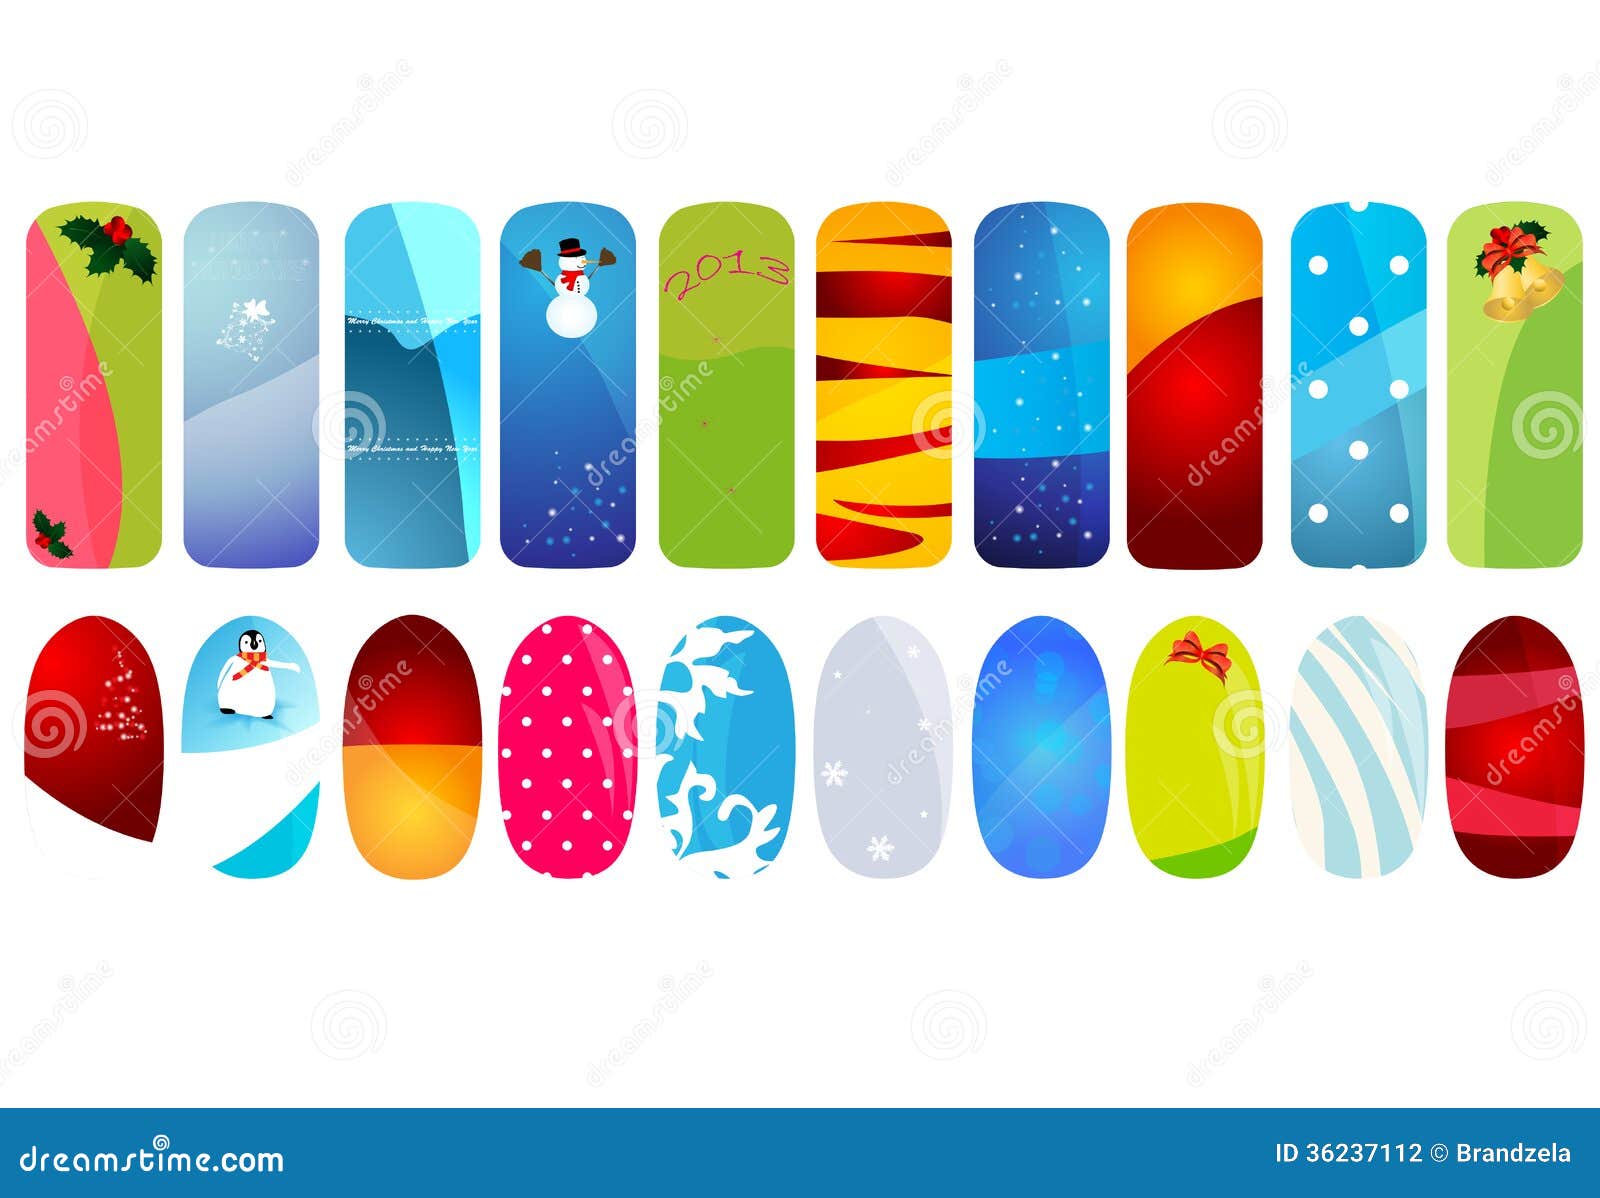 Download Vector Illustration Of Nail Designs With Holidays Stock ...